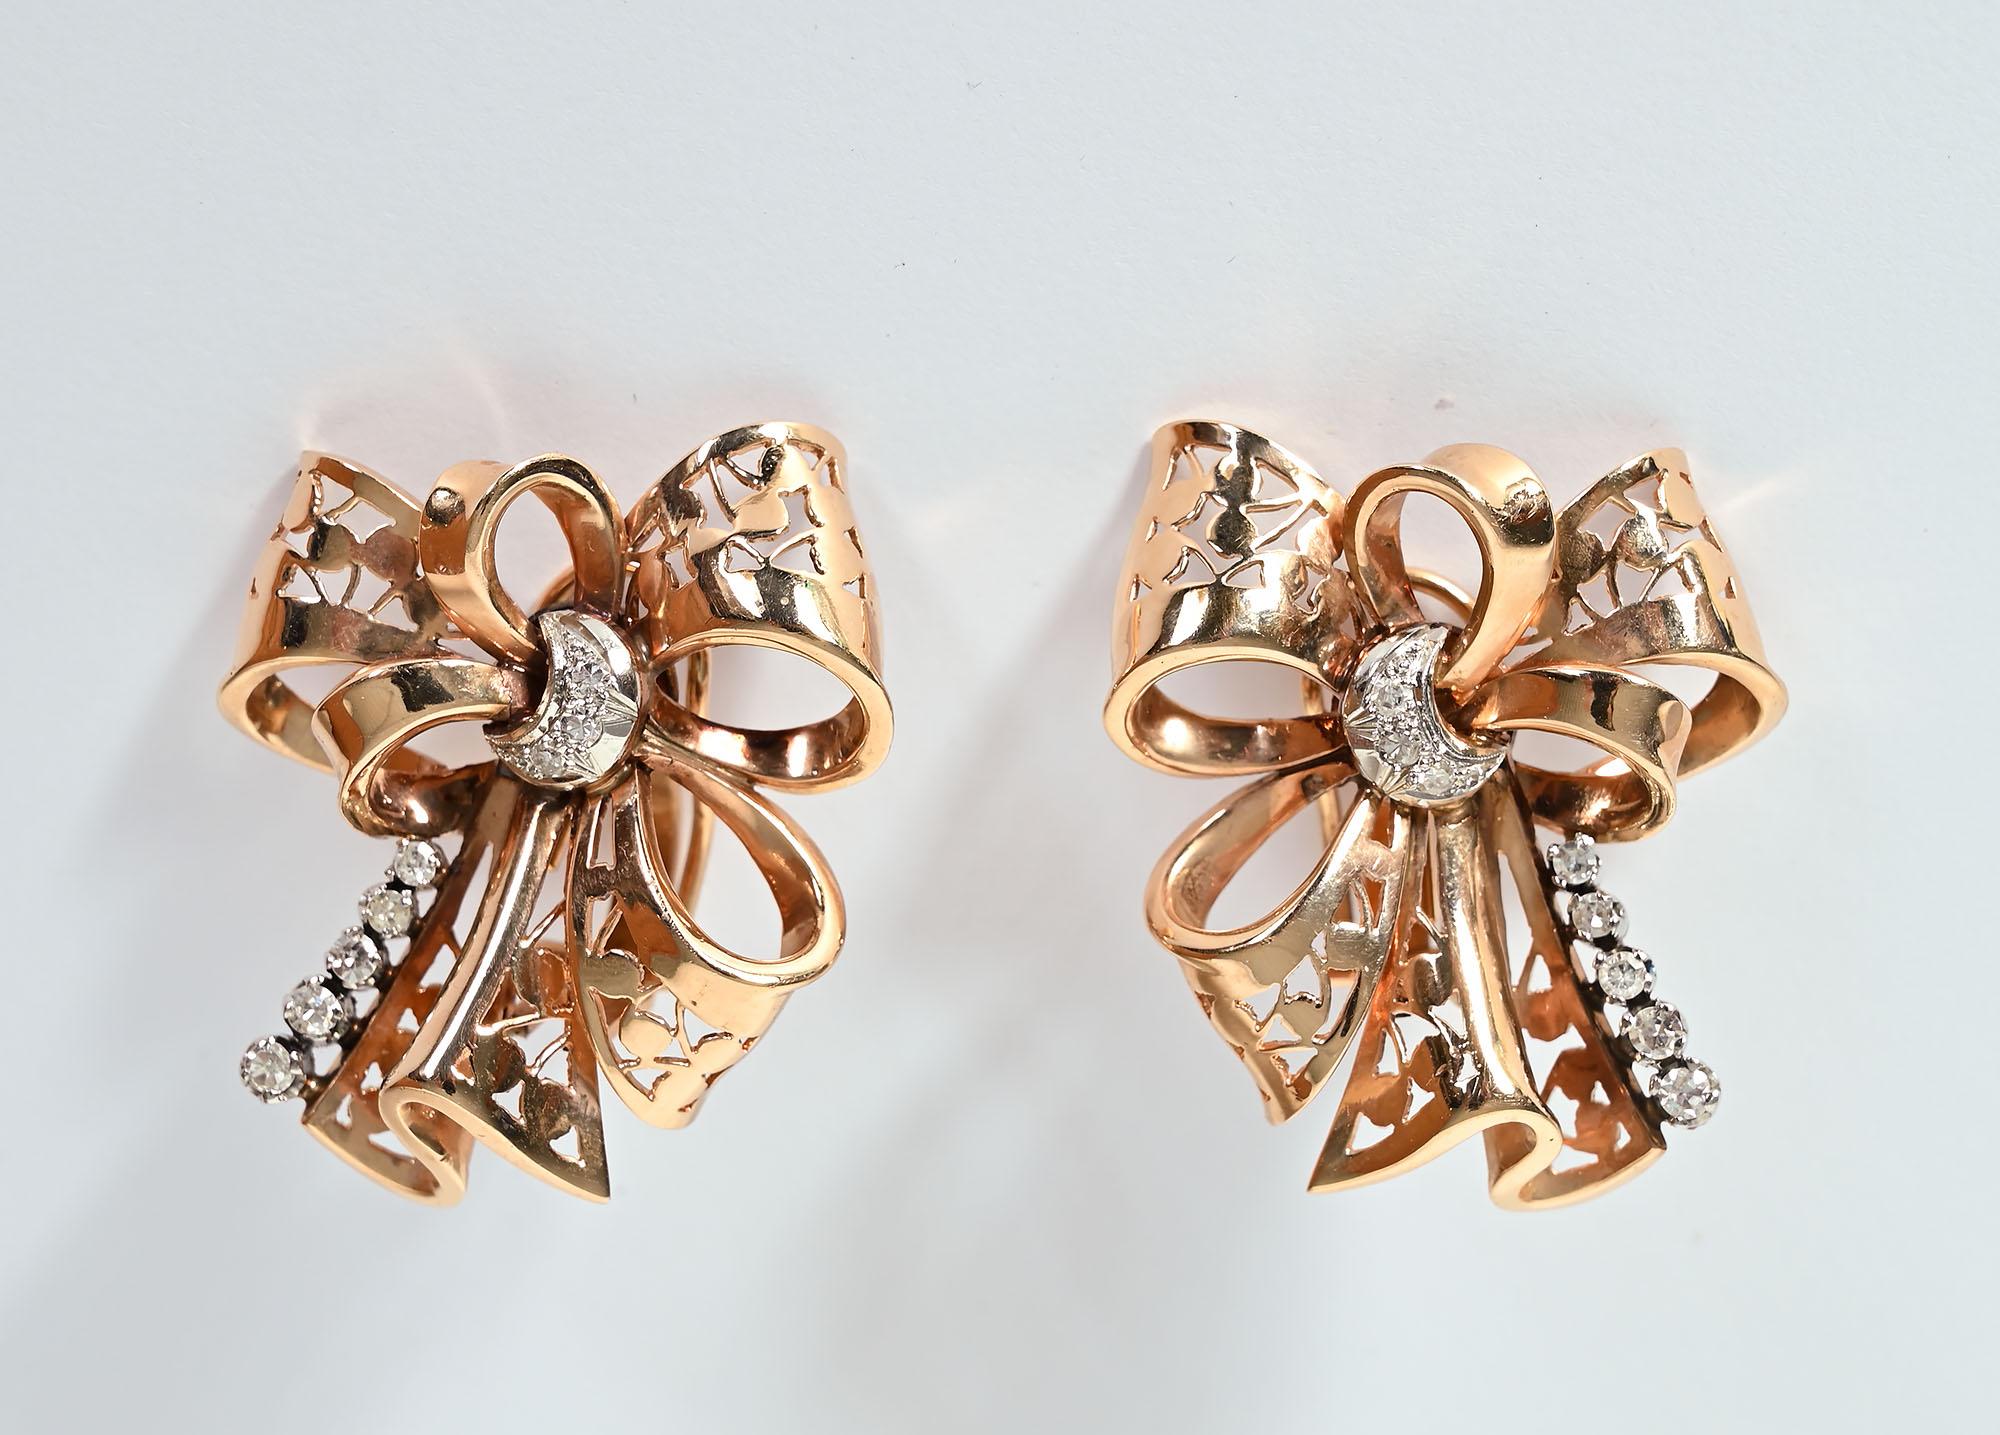 Graceful Retro Bow Earrings of 14 karat gold with diamonds. The bow loops have a lovely openwork design. The earrings have 16 single cut diamonds with a total weight of approximately .51 carats. They are G color; SI 2 clarity.
The earrings have clip